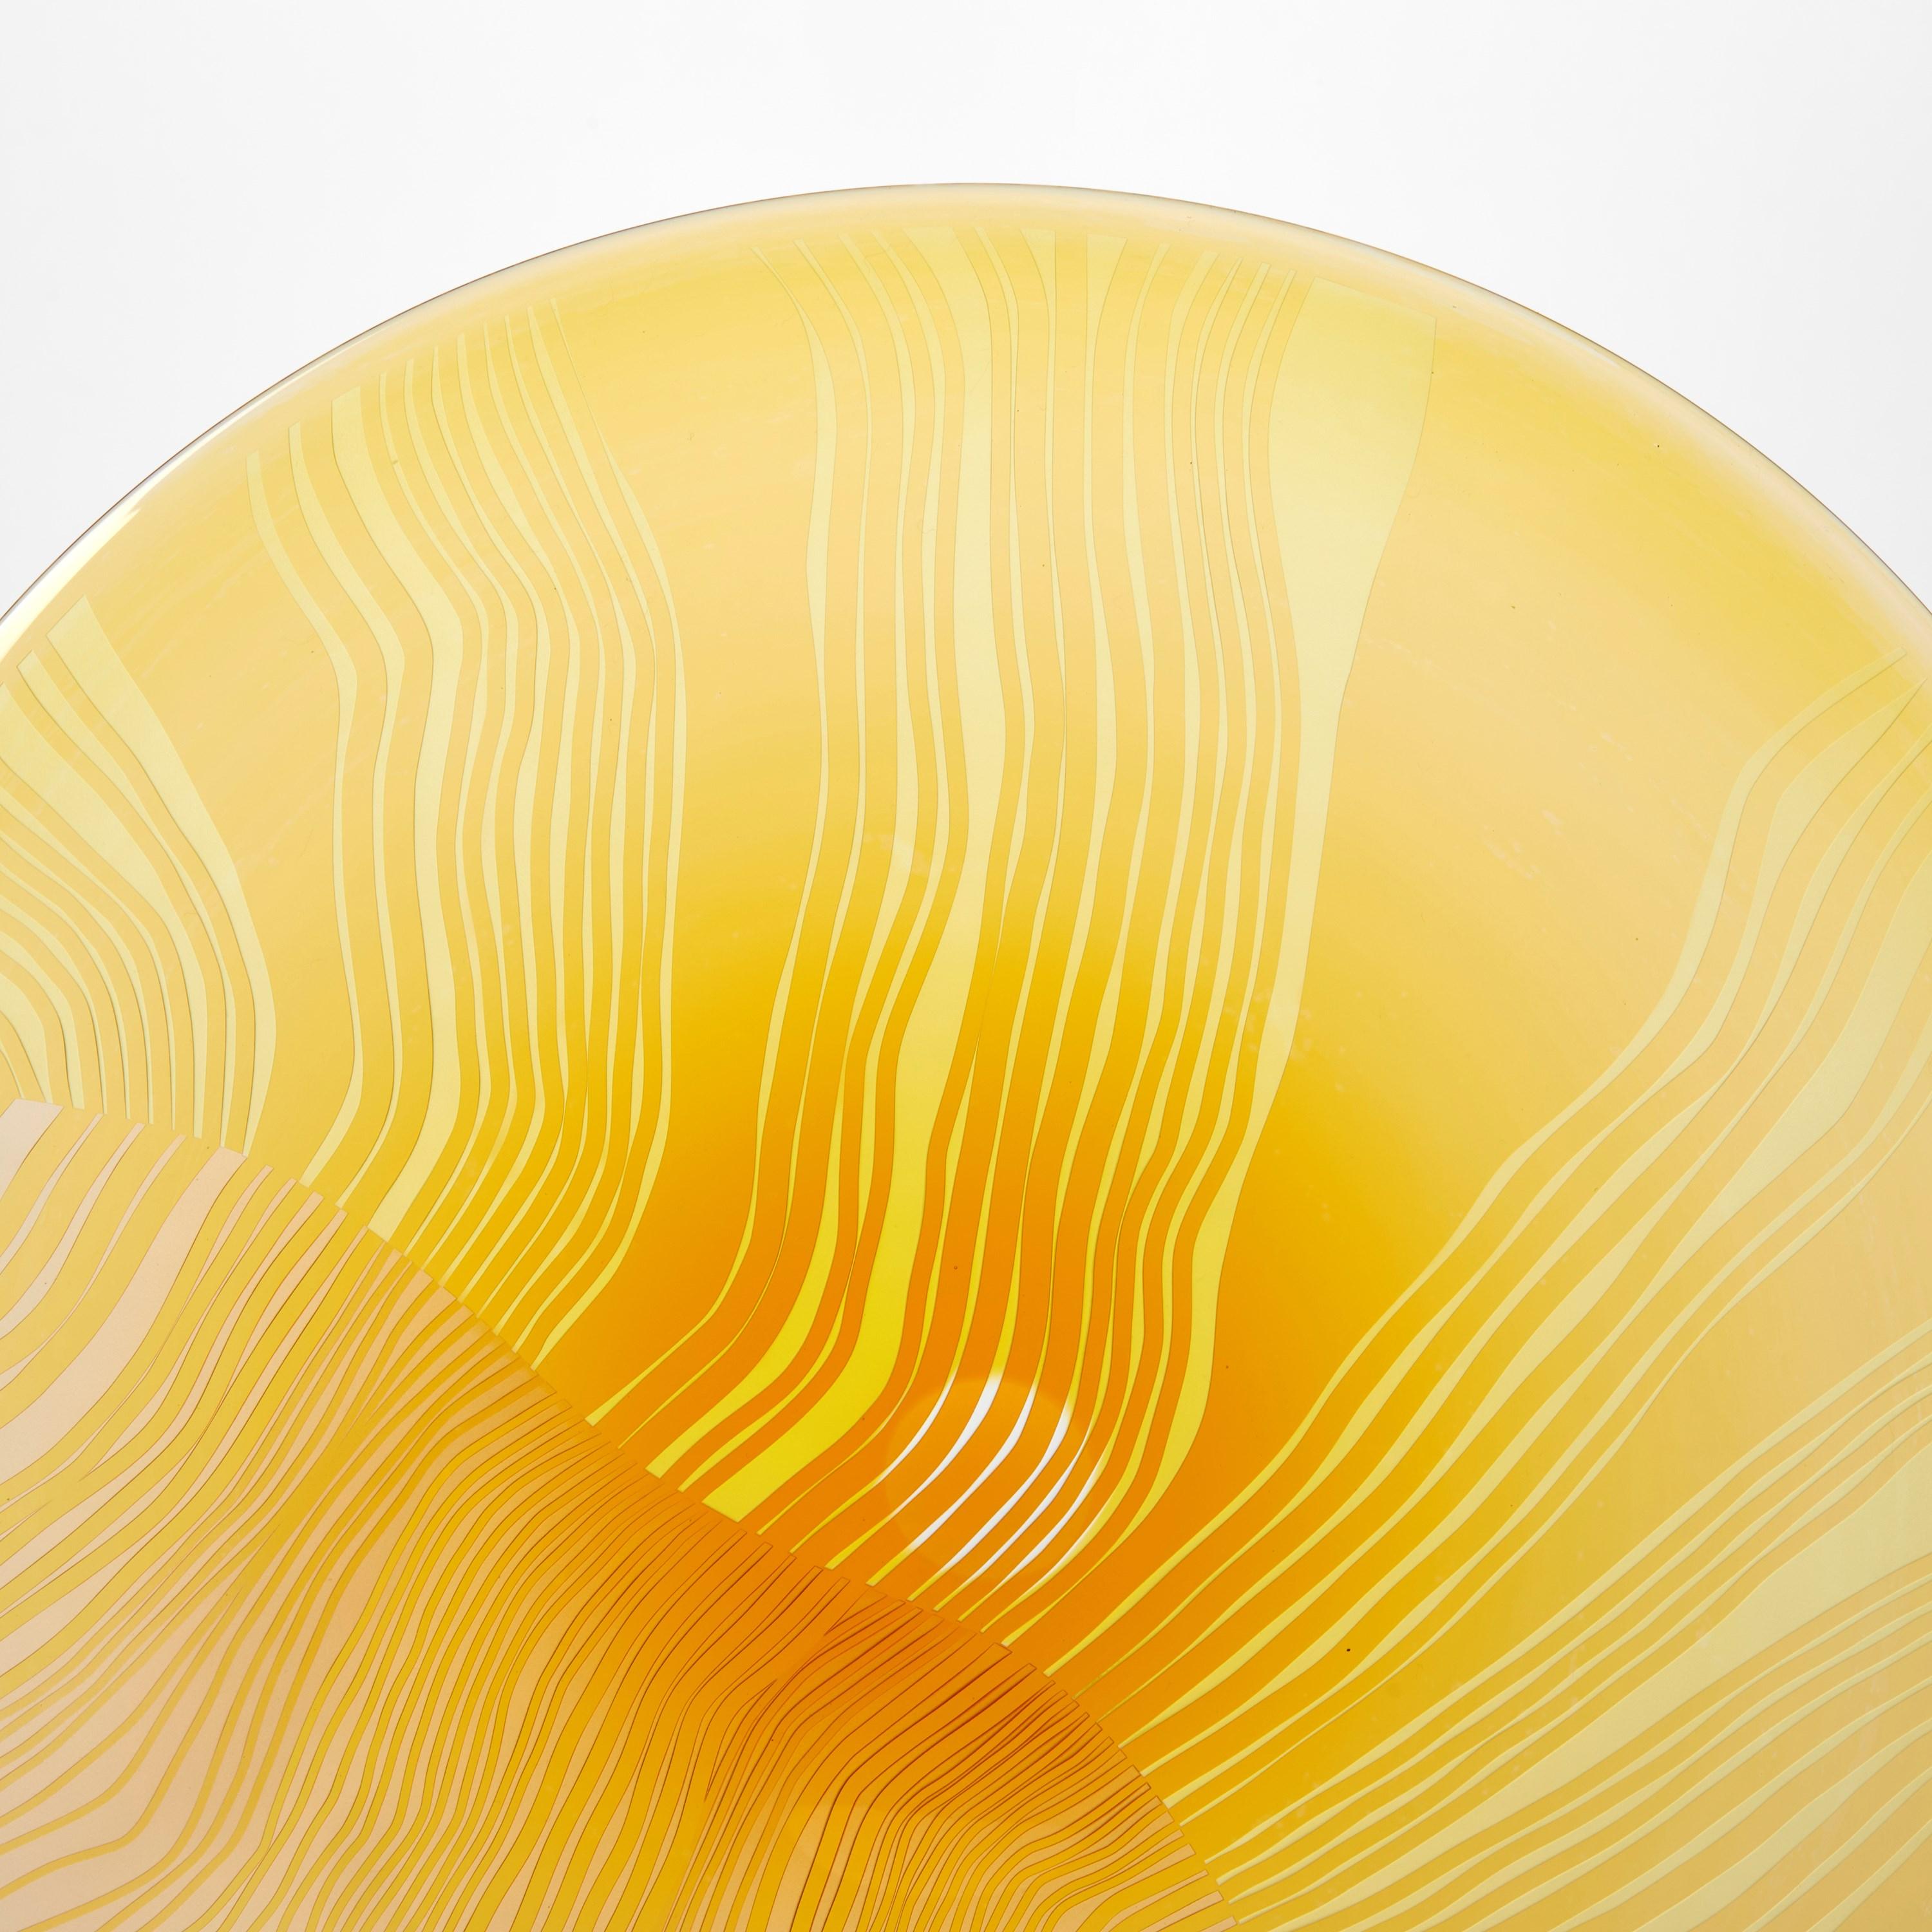 Hand-Crafted Solar Storm Gold over Gold, a mounted cut glass rondel artwork by Kate Jones For Sale